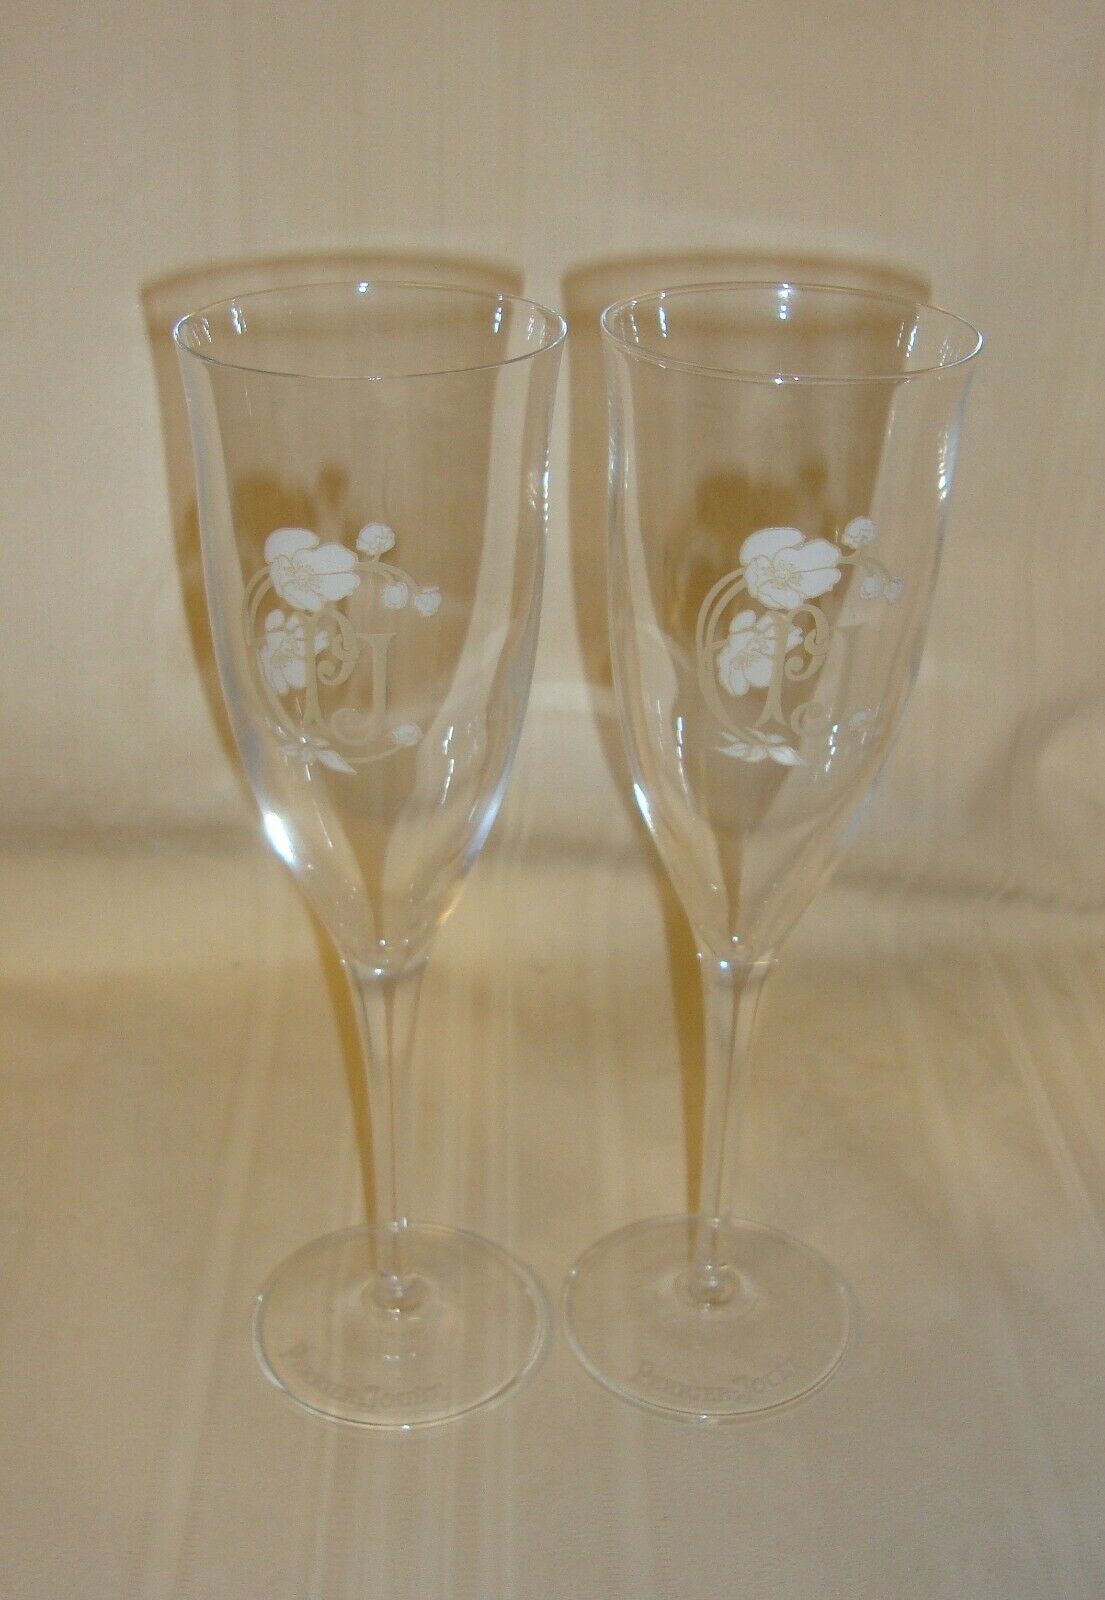 PERRIER JOUET France CRYSTAL CHAMPAGNE FLUTES Set Of 2 ,Gold PJ Logos - Other